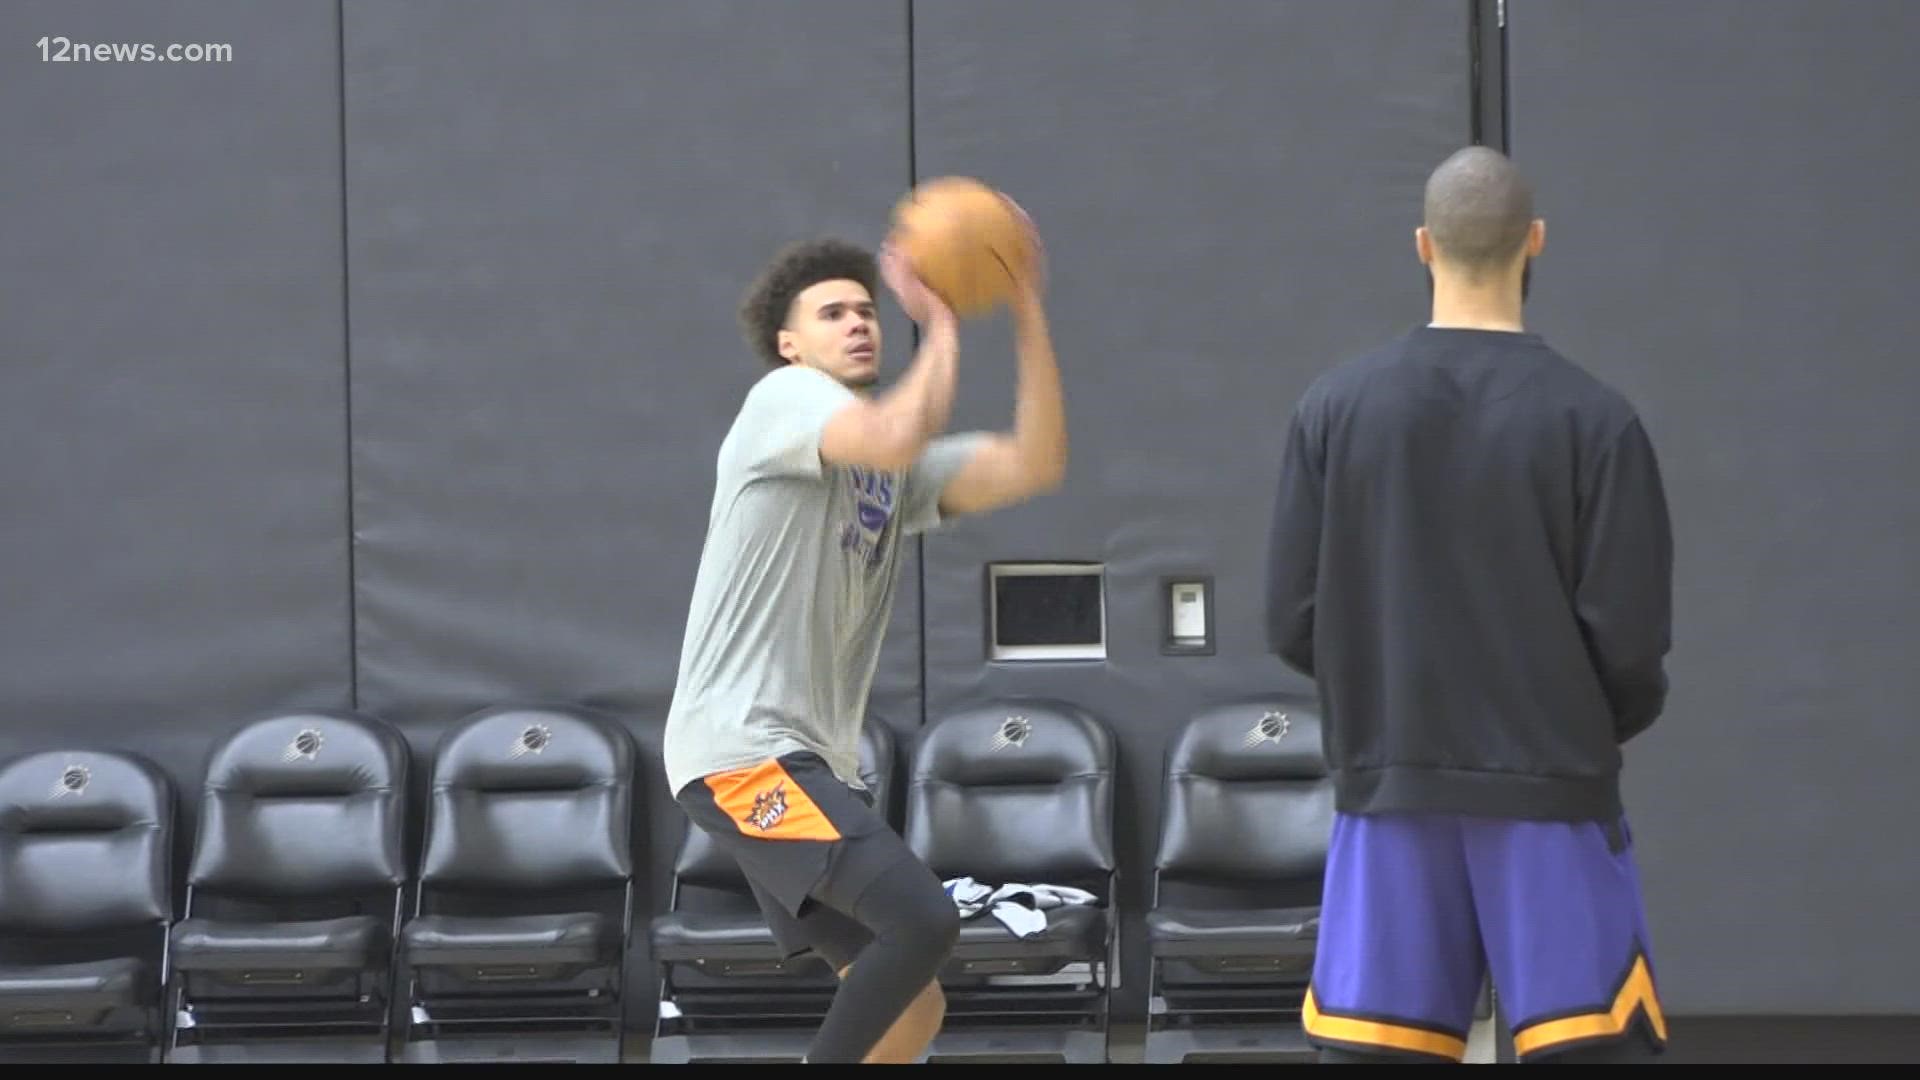 The Suns are making their final tune-ups before opening the postseason as the no. 1 seed in the Western Conference. Here's a look inside the Suns' practice facility.